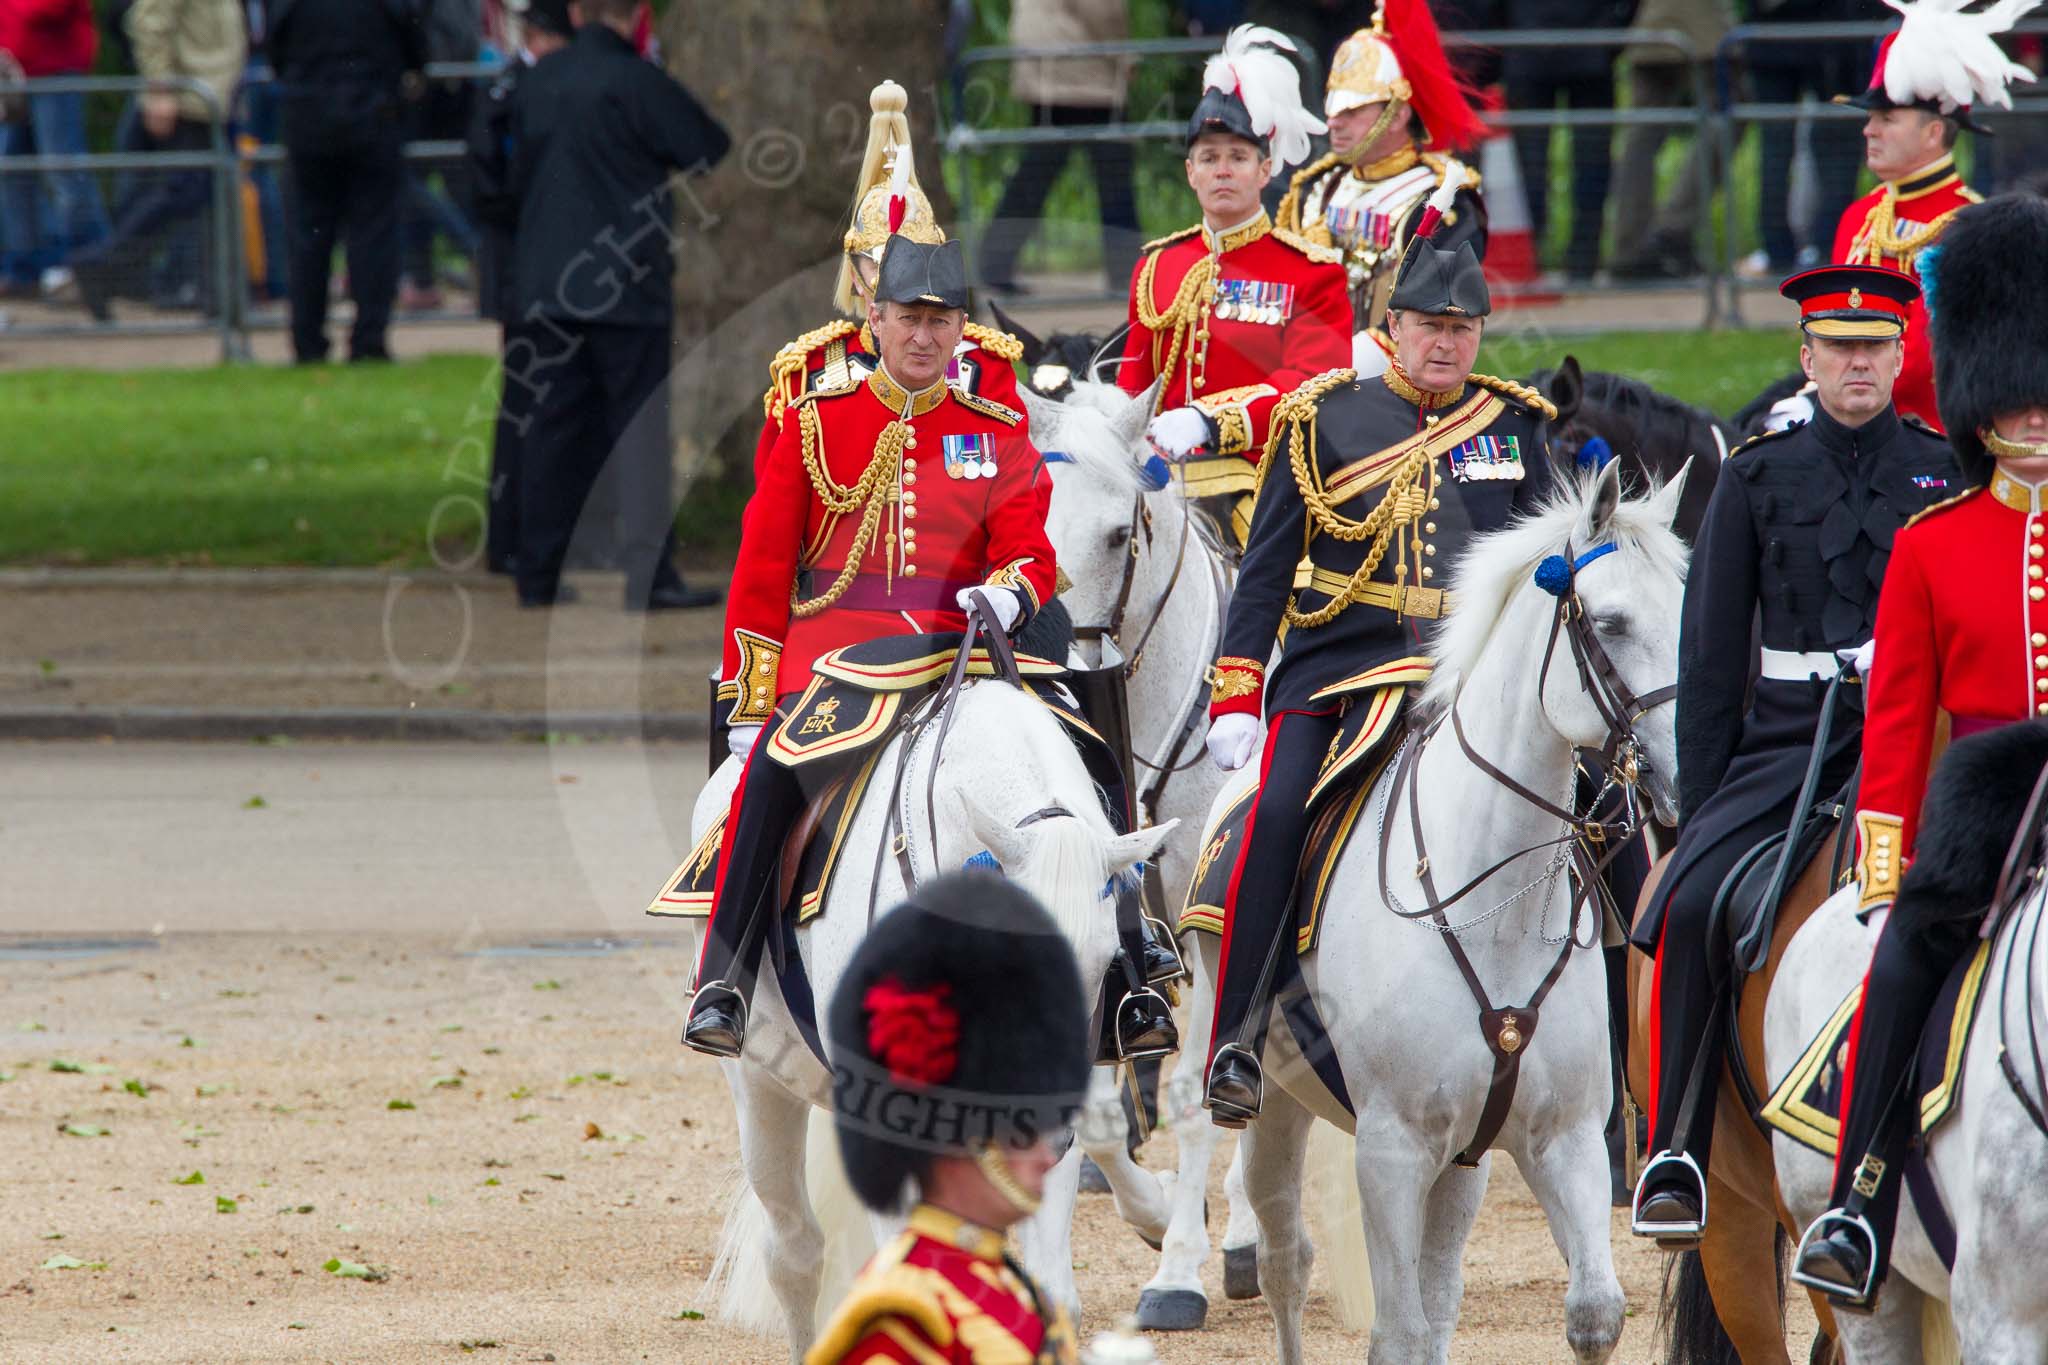 The Colonel's Review 2012: Crown Equerry and Equerry in Waiting to Her Majesty: Colonel W T Browne in the black unifor,. next to hi, Lieutenant Colonel A F Matheson of Matheson, yr, in the red uniform.
Horse Guards Parade, Westminster,
London SW1,

United Kingdom,
on 09 June 2012 at 11:04, image #194